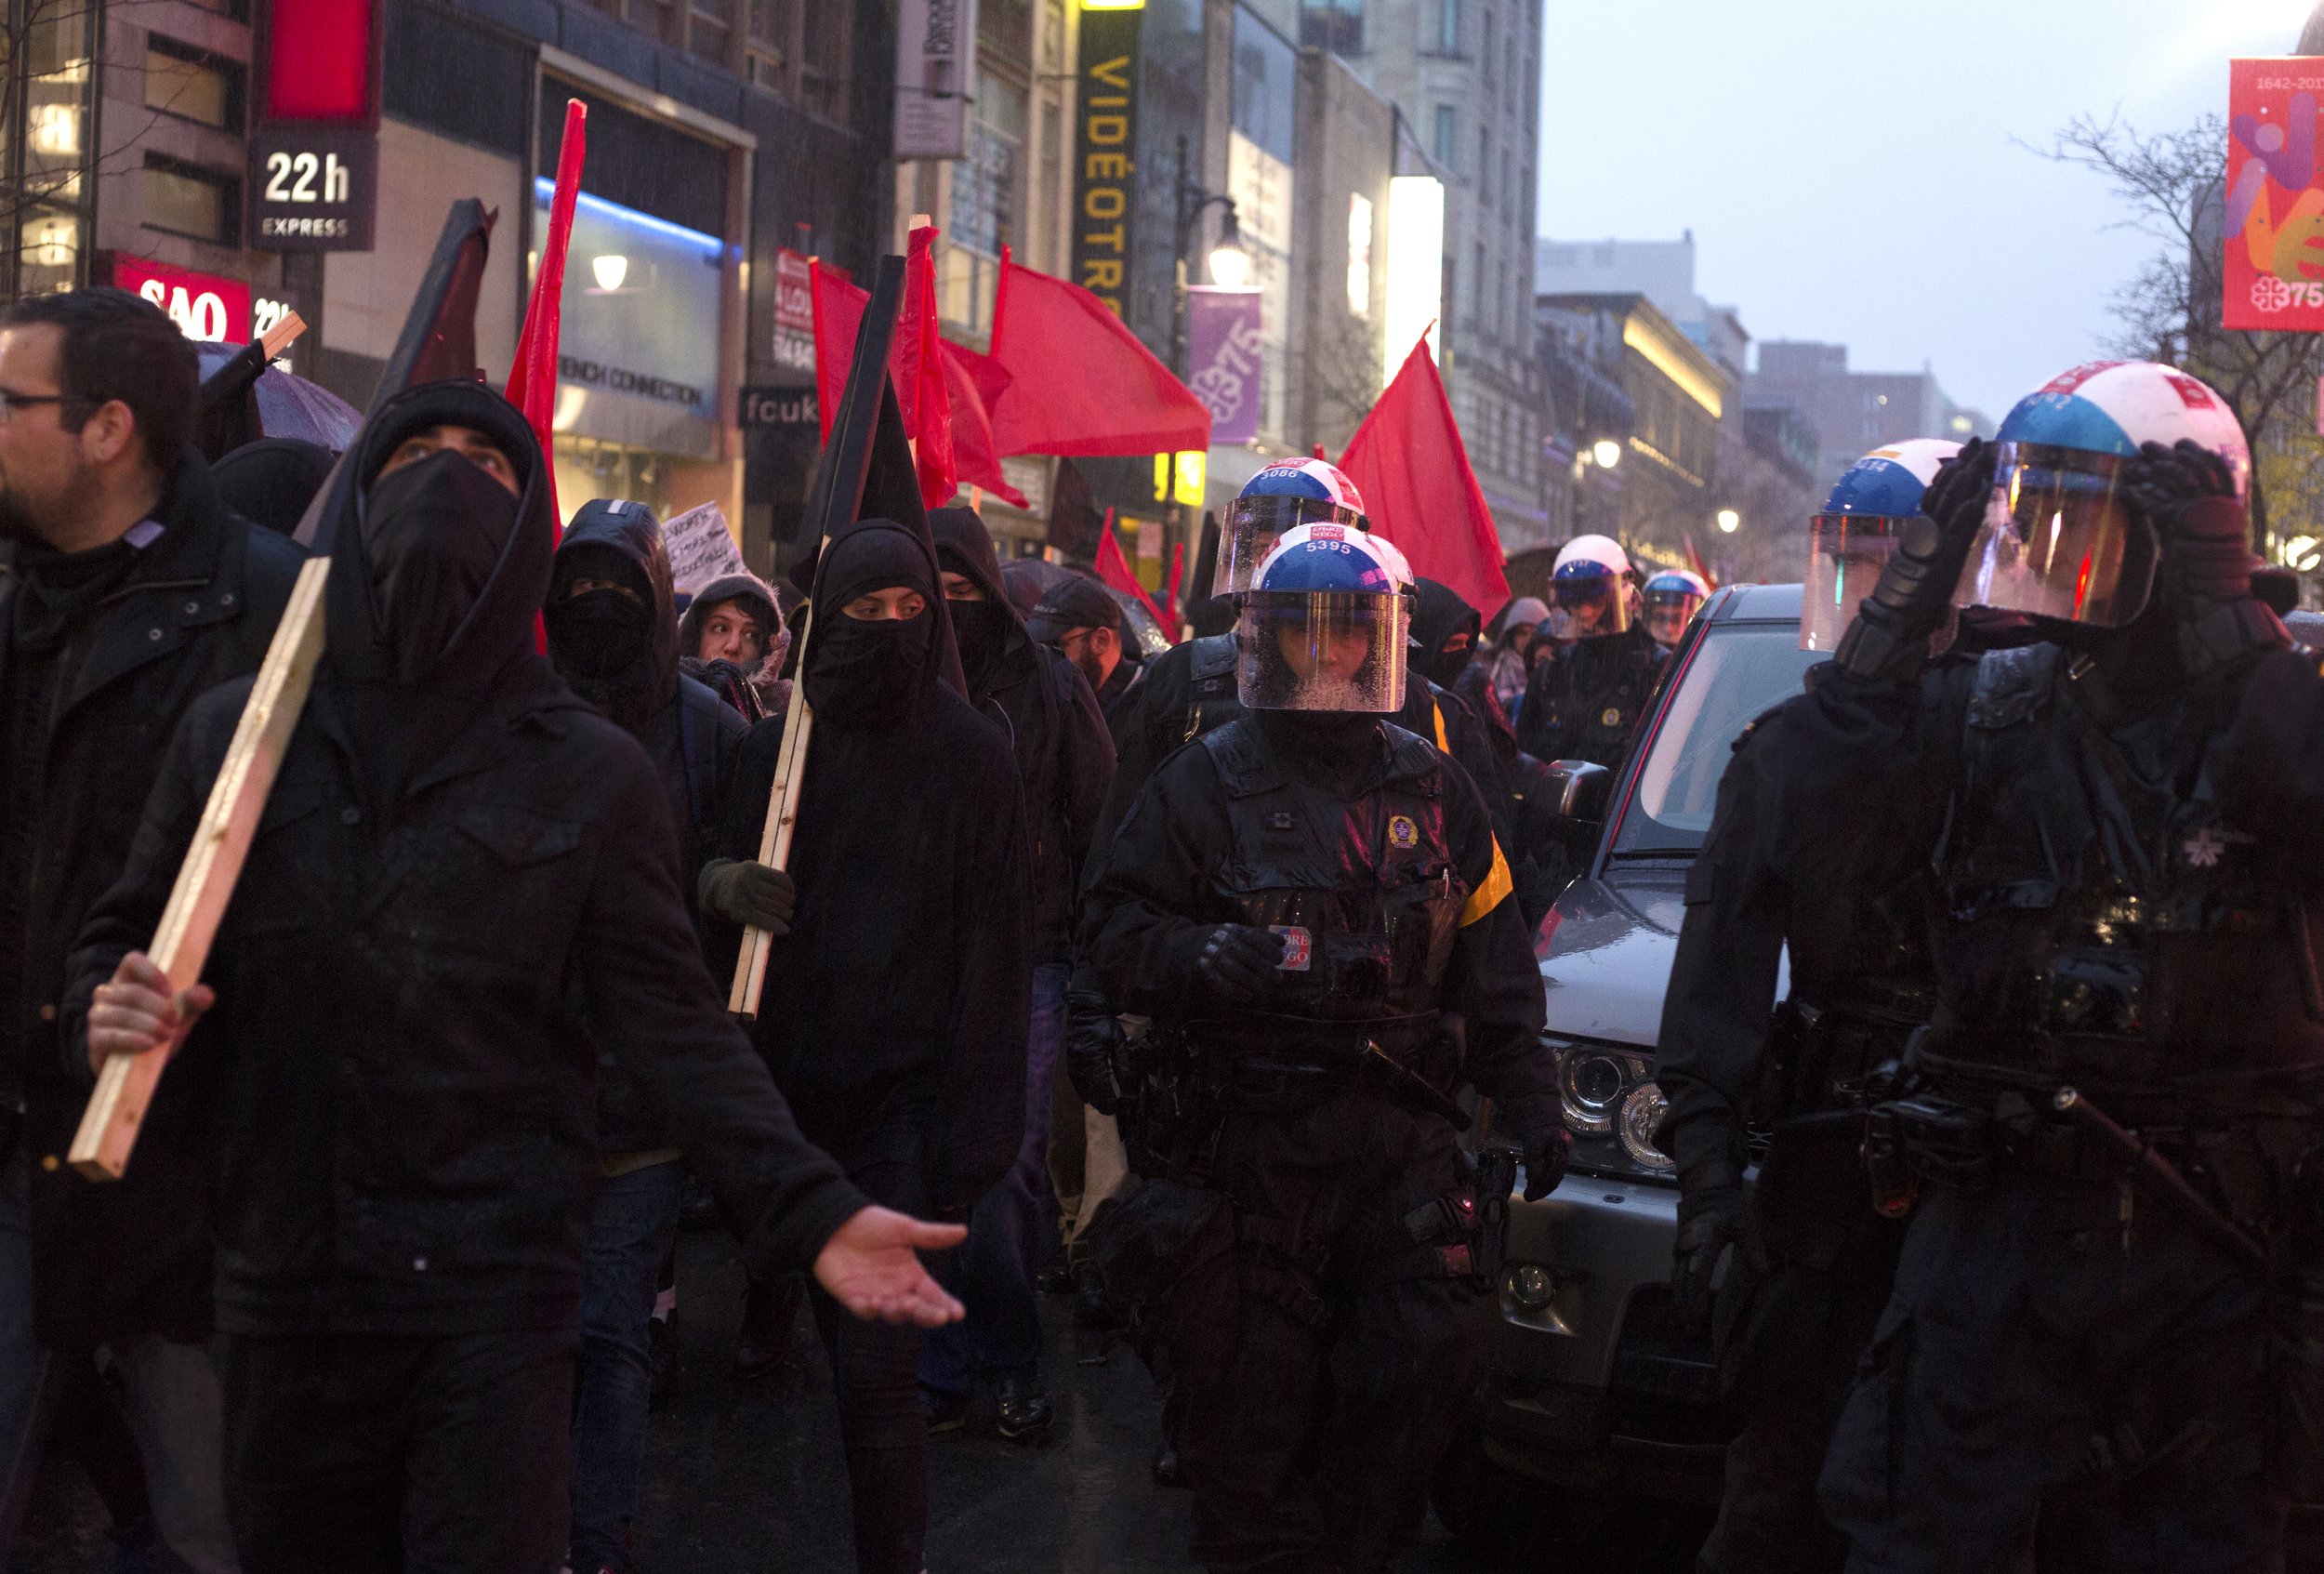  Protestors and SPVM walking in the rain during a May Day demonstration. May 1 2017 